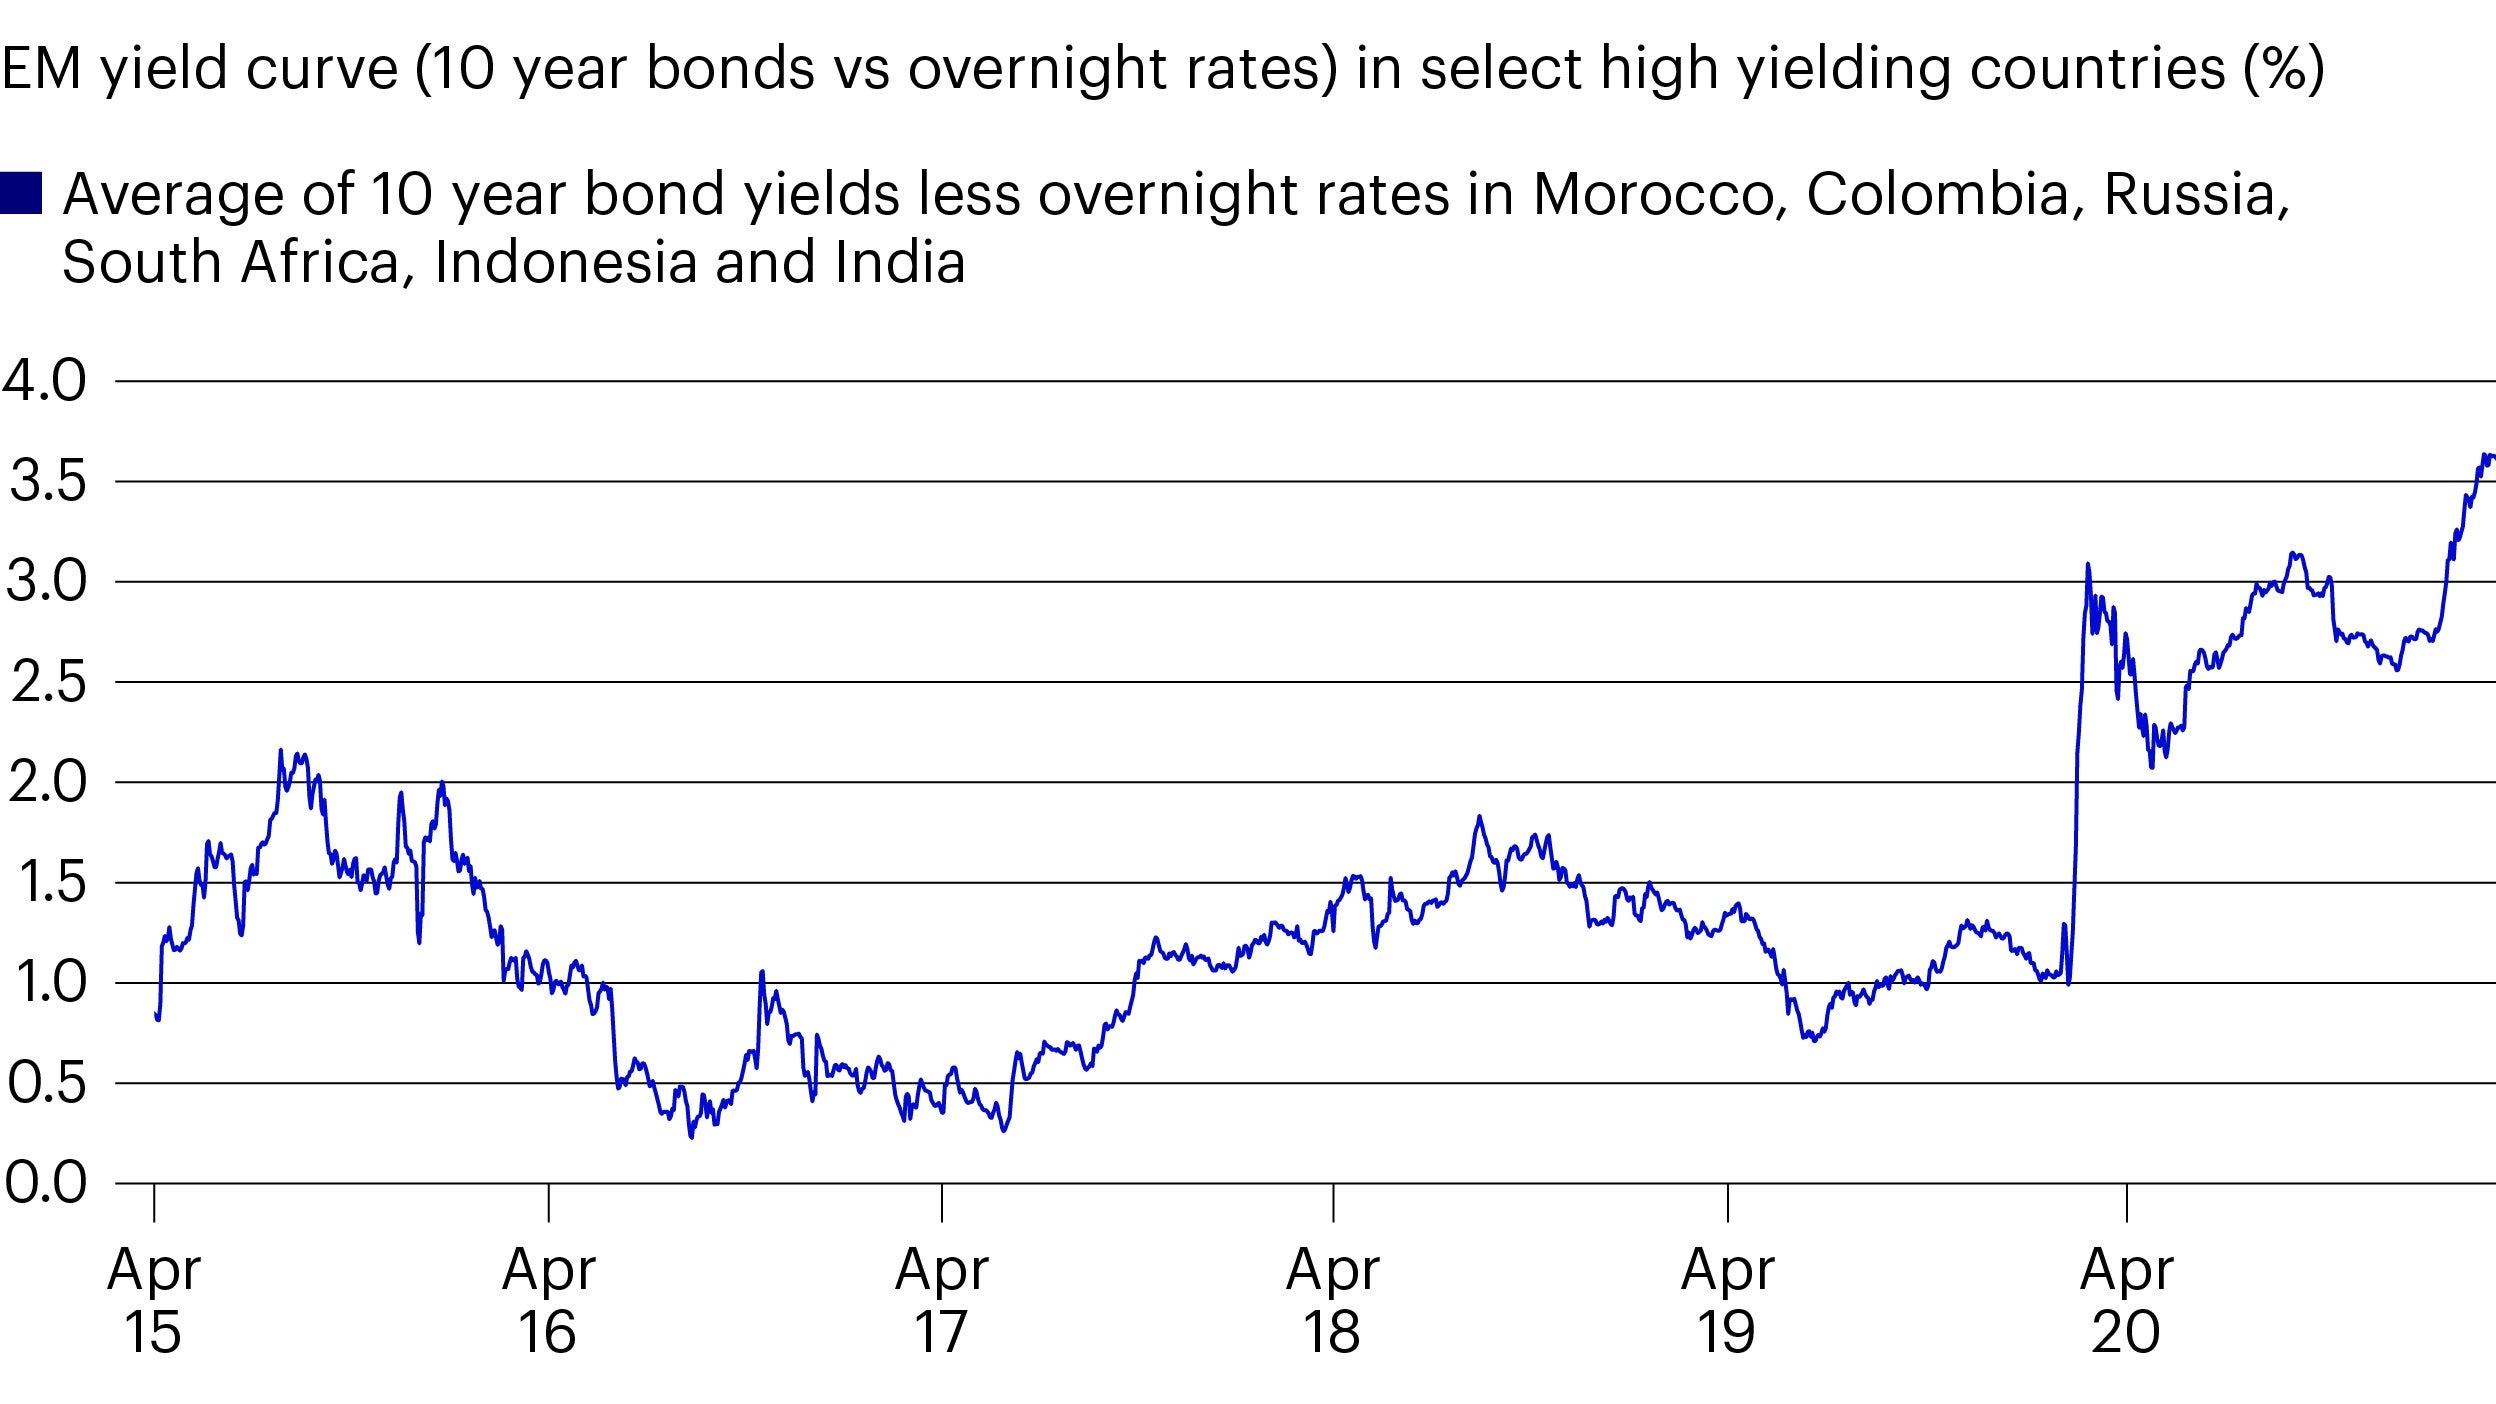 Emerging Markets rates offer very attractive expected returns - Steep Yield Curves